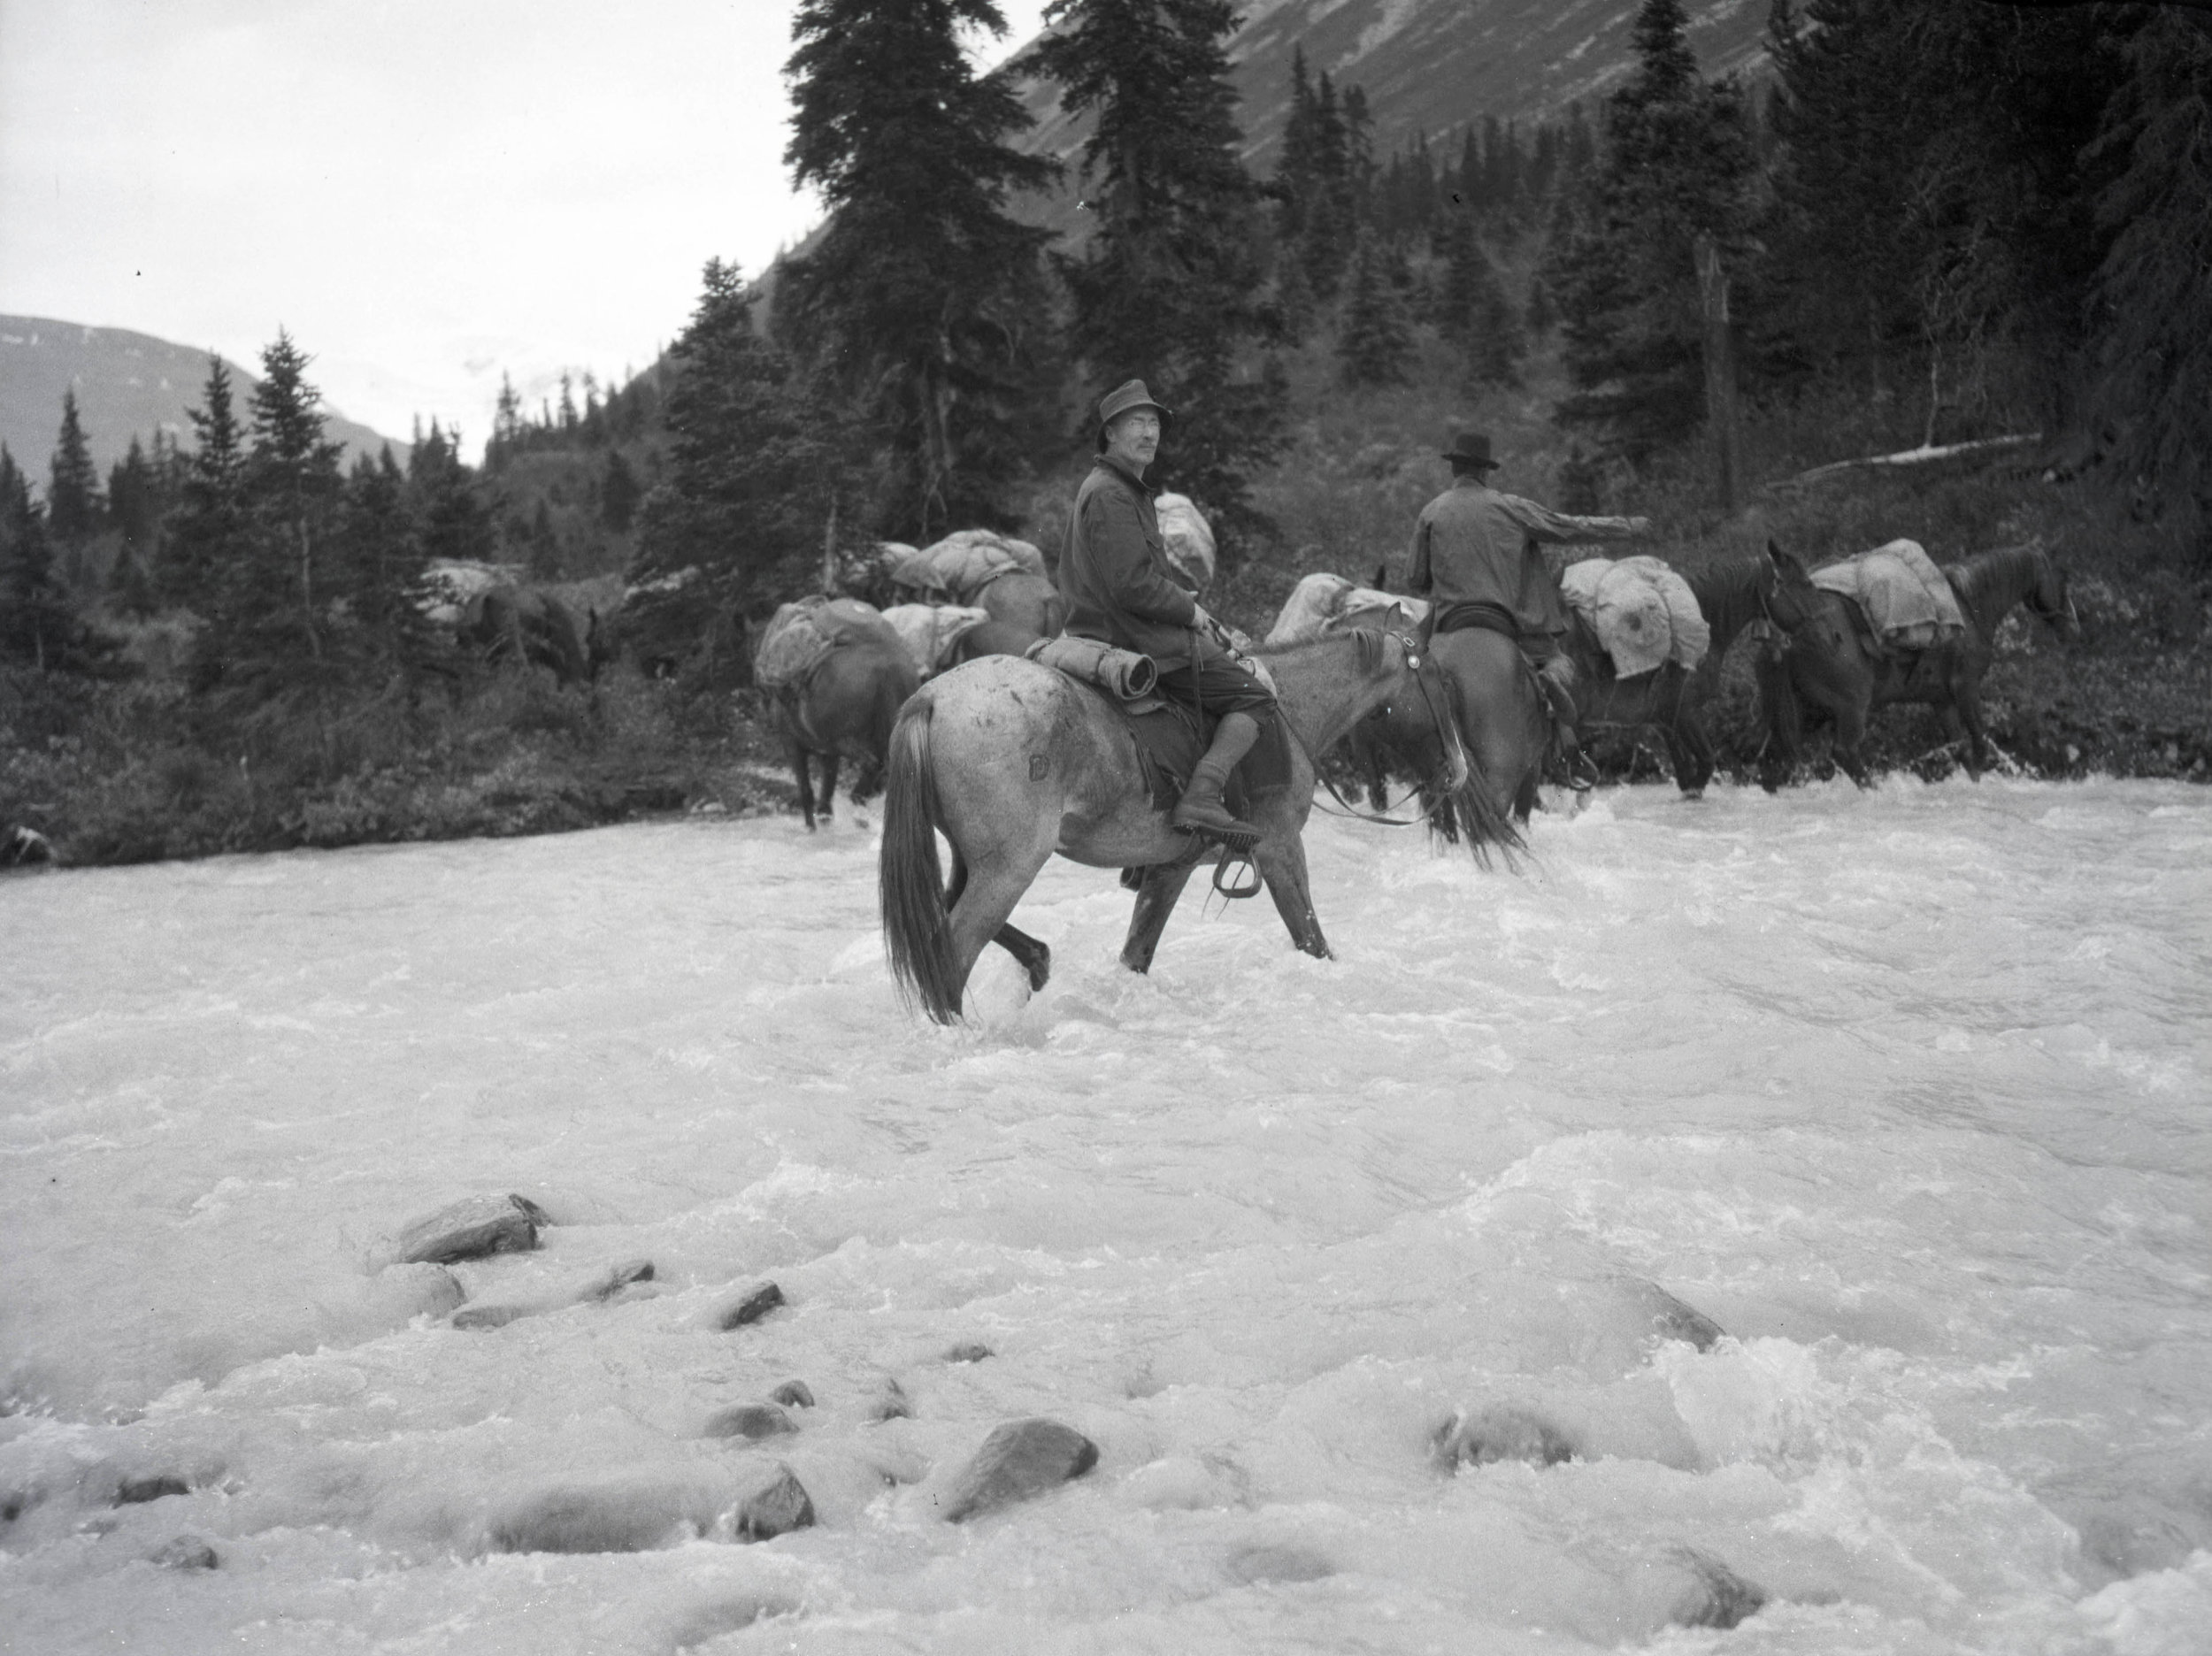  The climbing party fording a river on horses, there were fewer roads and cars were less reliable, so travel by horse was common 